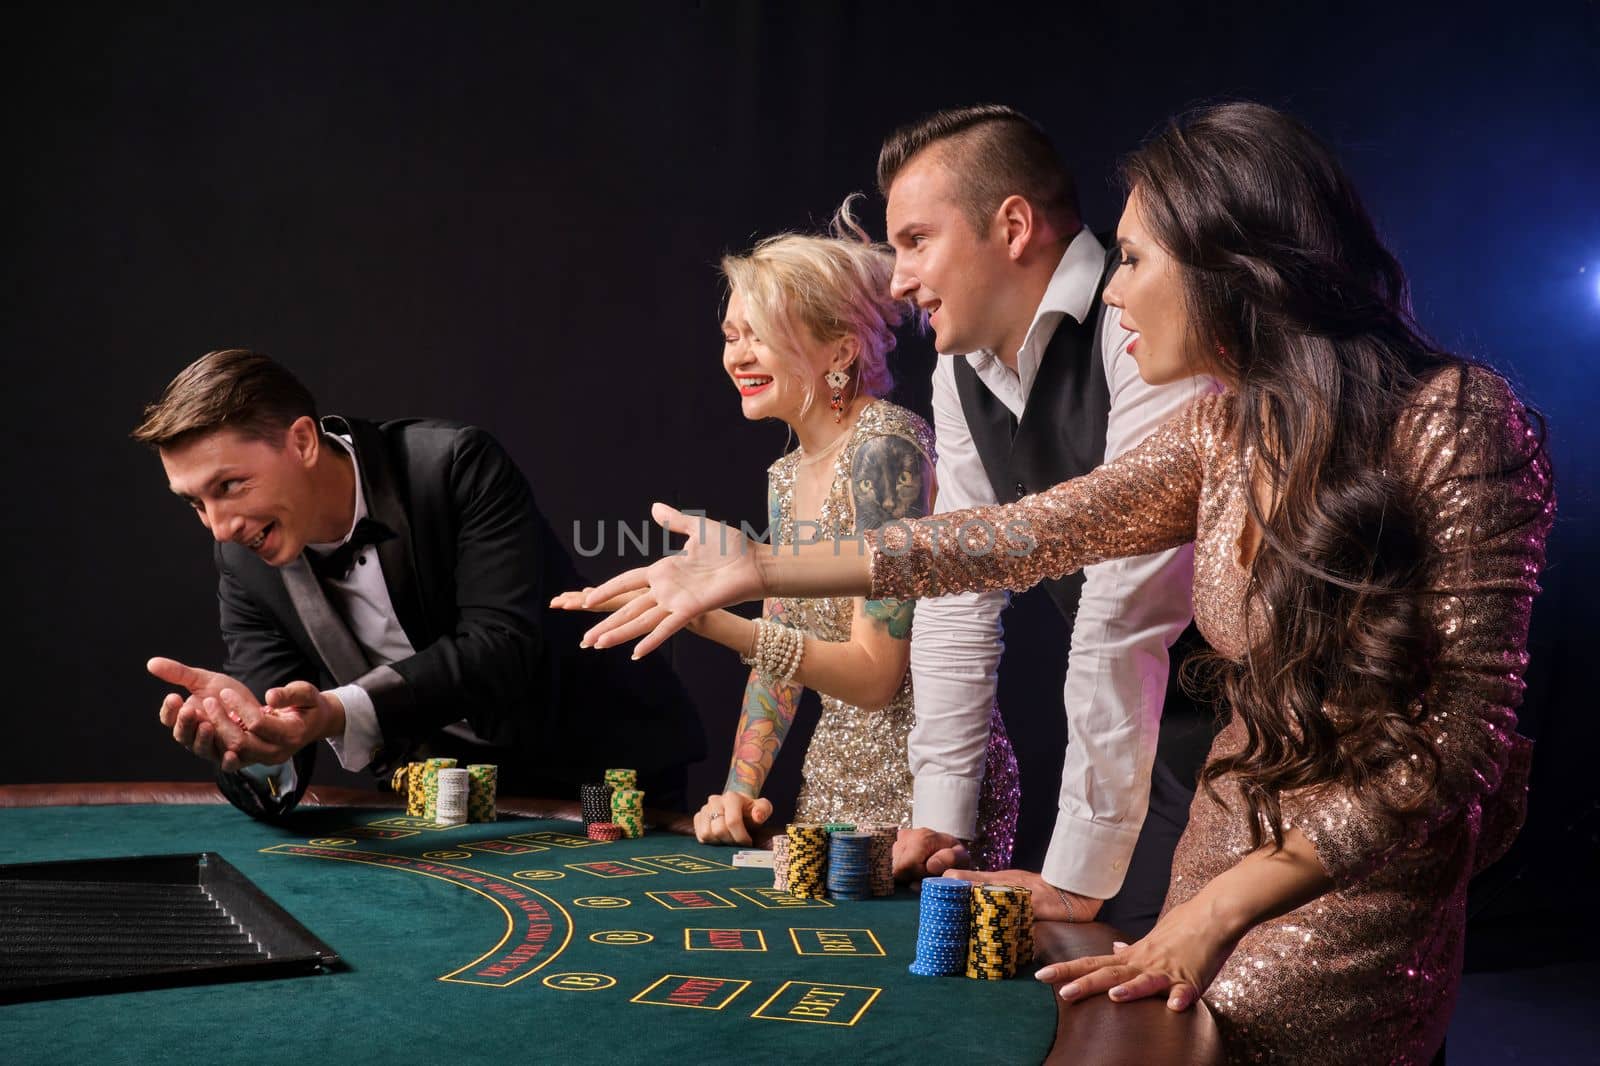 Side shot of a confused rich buddies playing poker at casino. Youth have lose. They are standing at the table against a red and blue backlights on black background. Risky gambling entertainment.